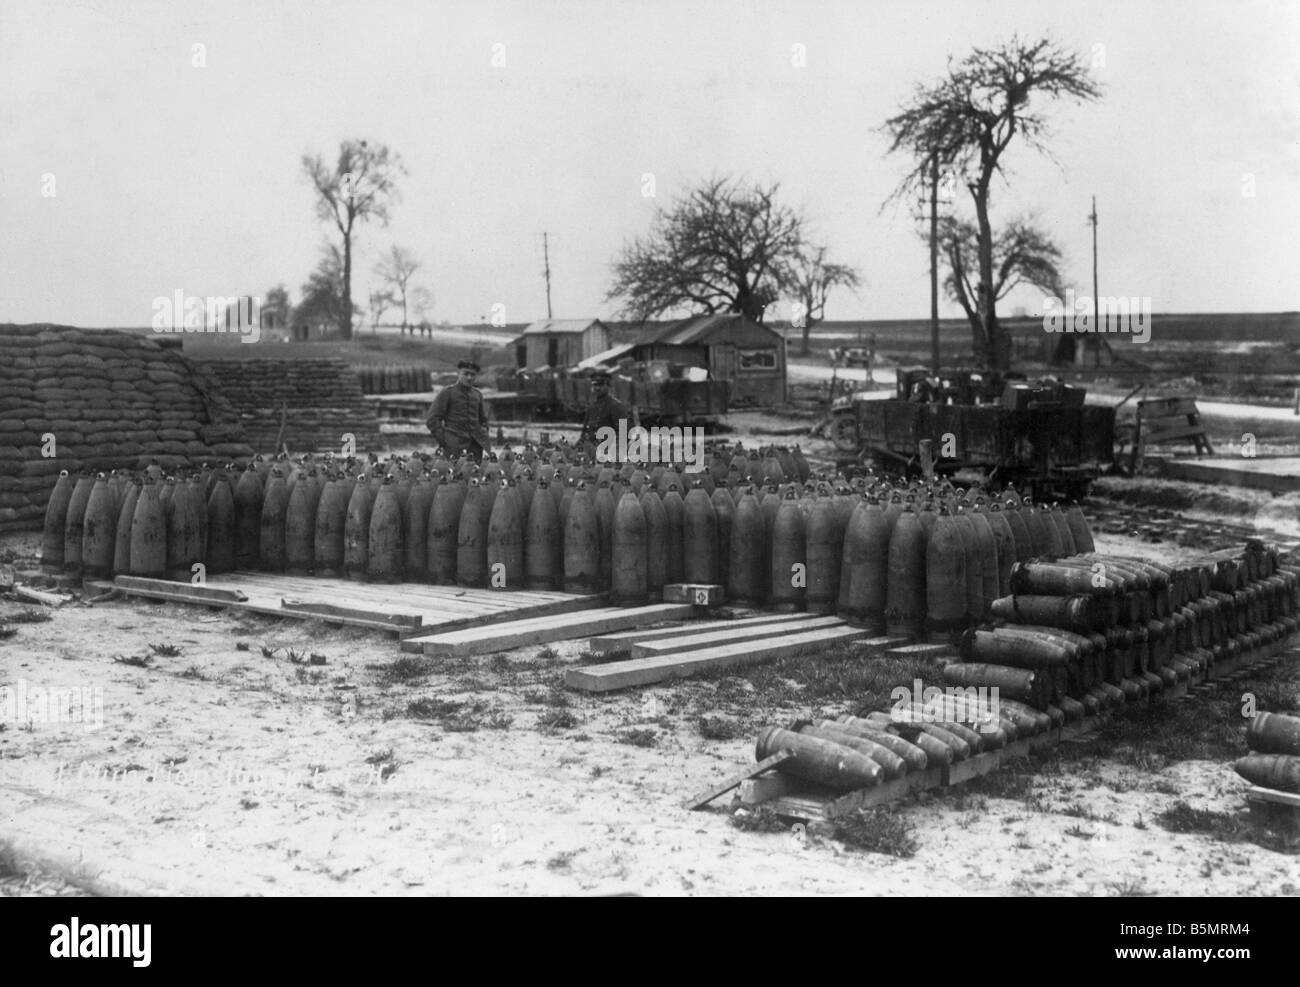 9 1918 3 21 A1 1 Engl Ammunitions camp at Ham March 1918 World War 1 Western Front German major offensive March July 1918 Engl A Stock Photo